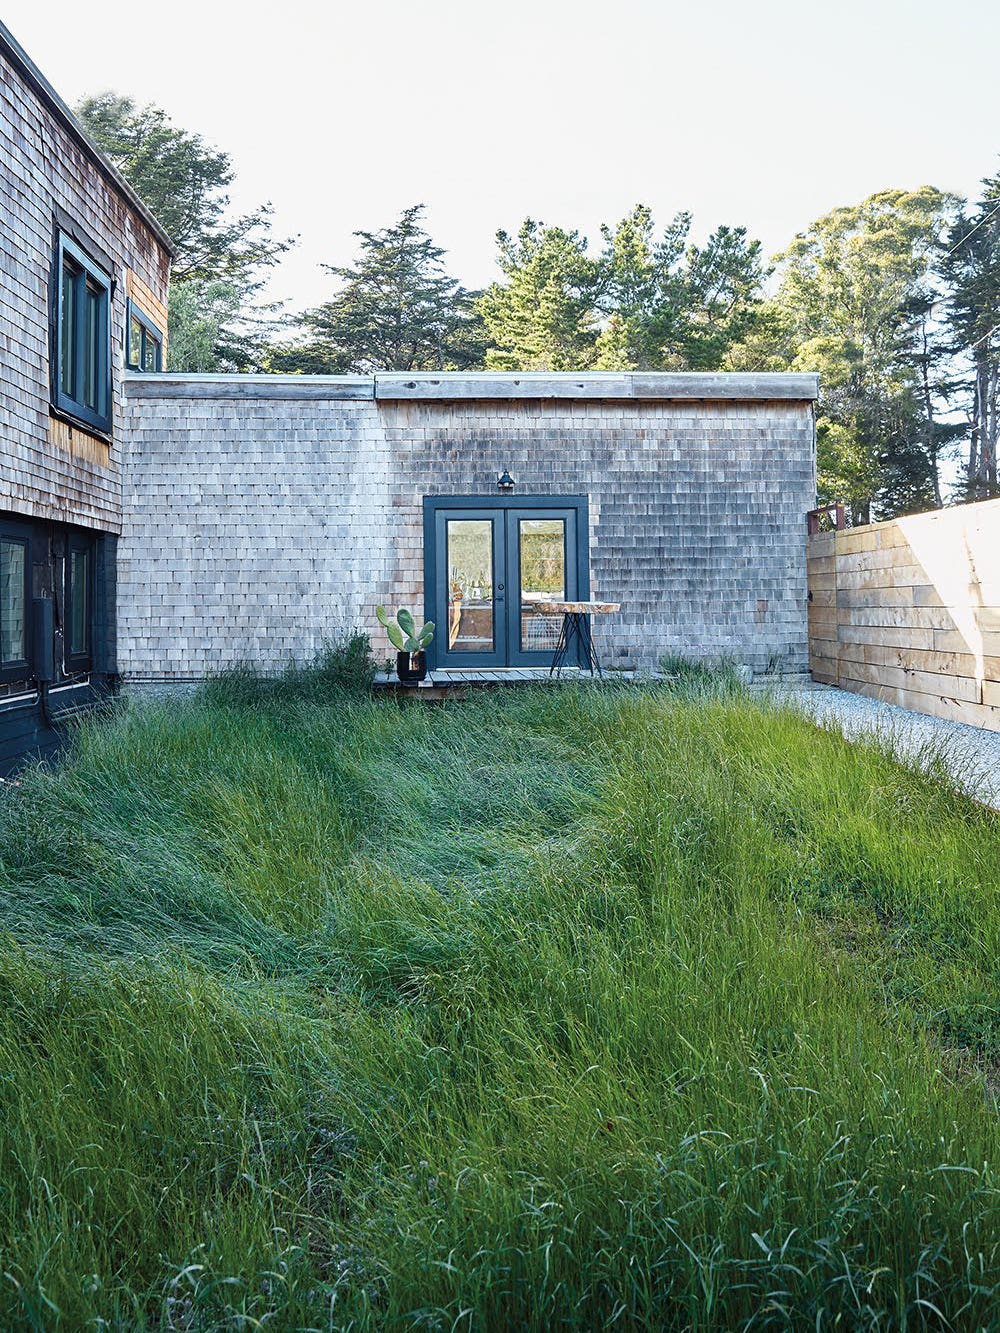 Building with expansive lawn